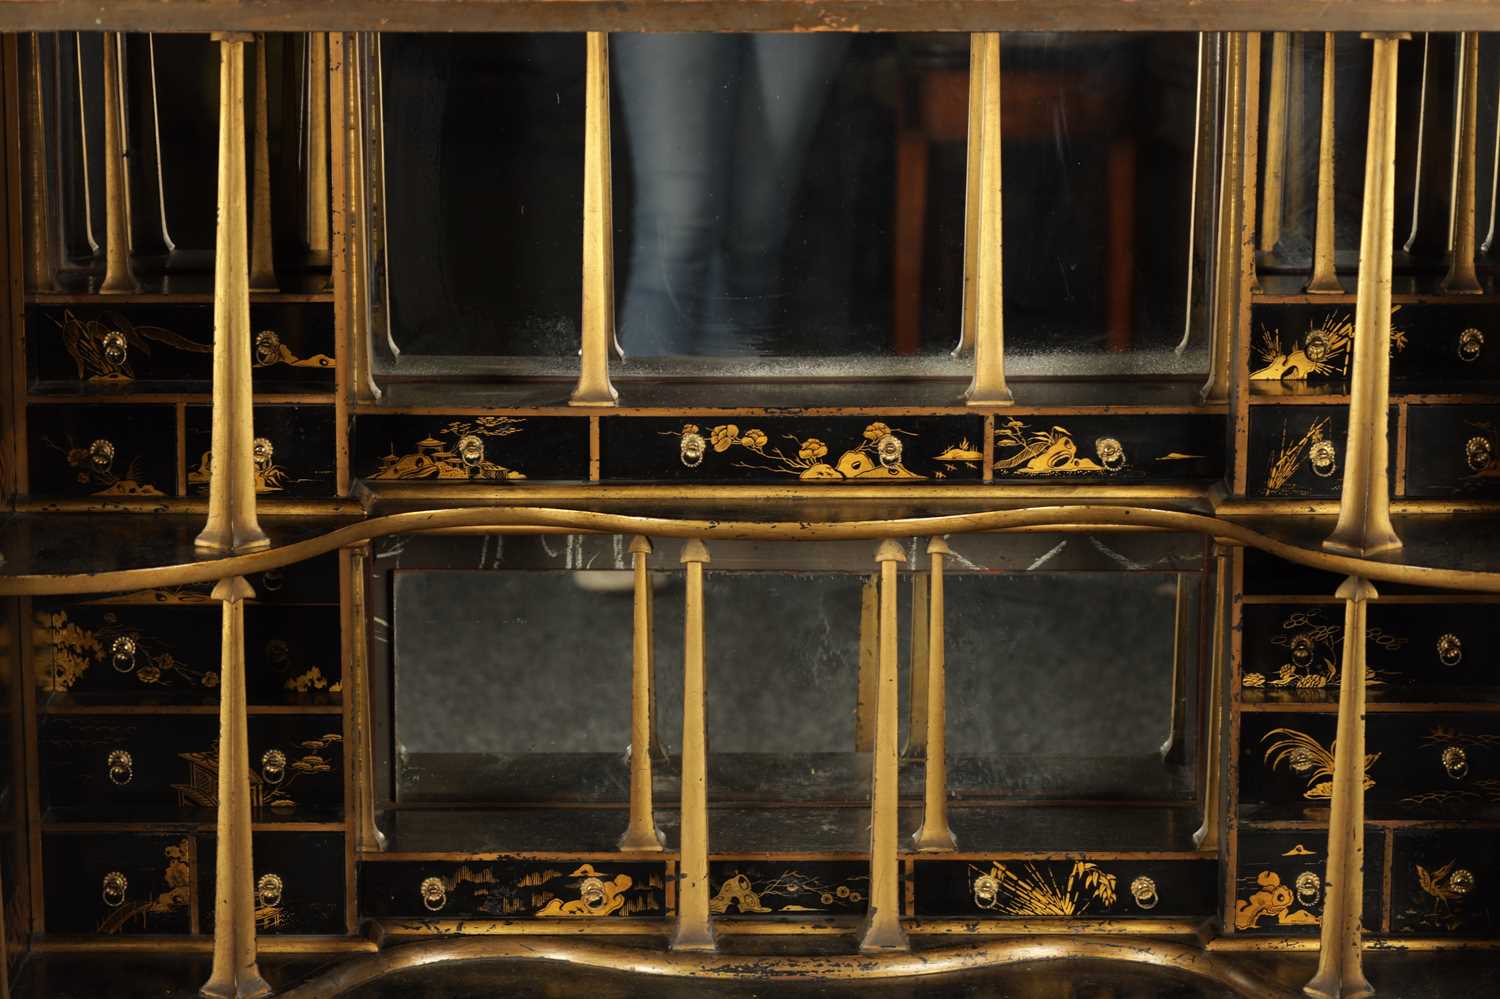 AN ENGLISH REGENCY CHINOISERIE DECORATED LACQUERWORK CABINET ON STAND - Image 4 of 9